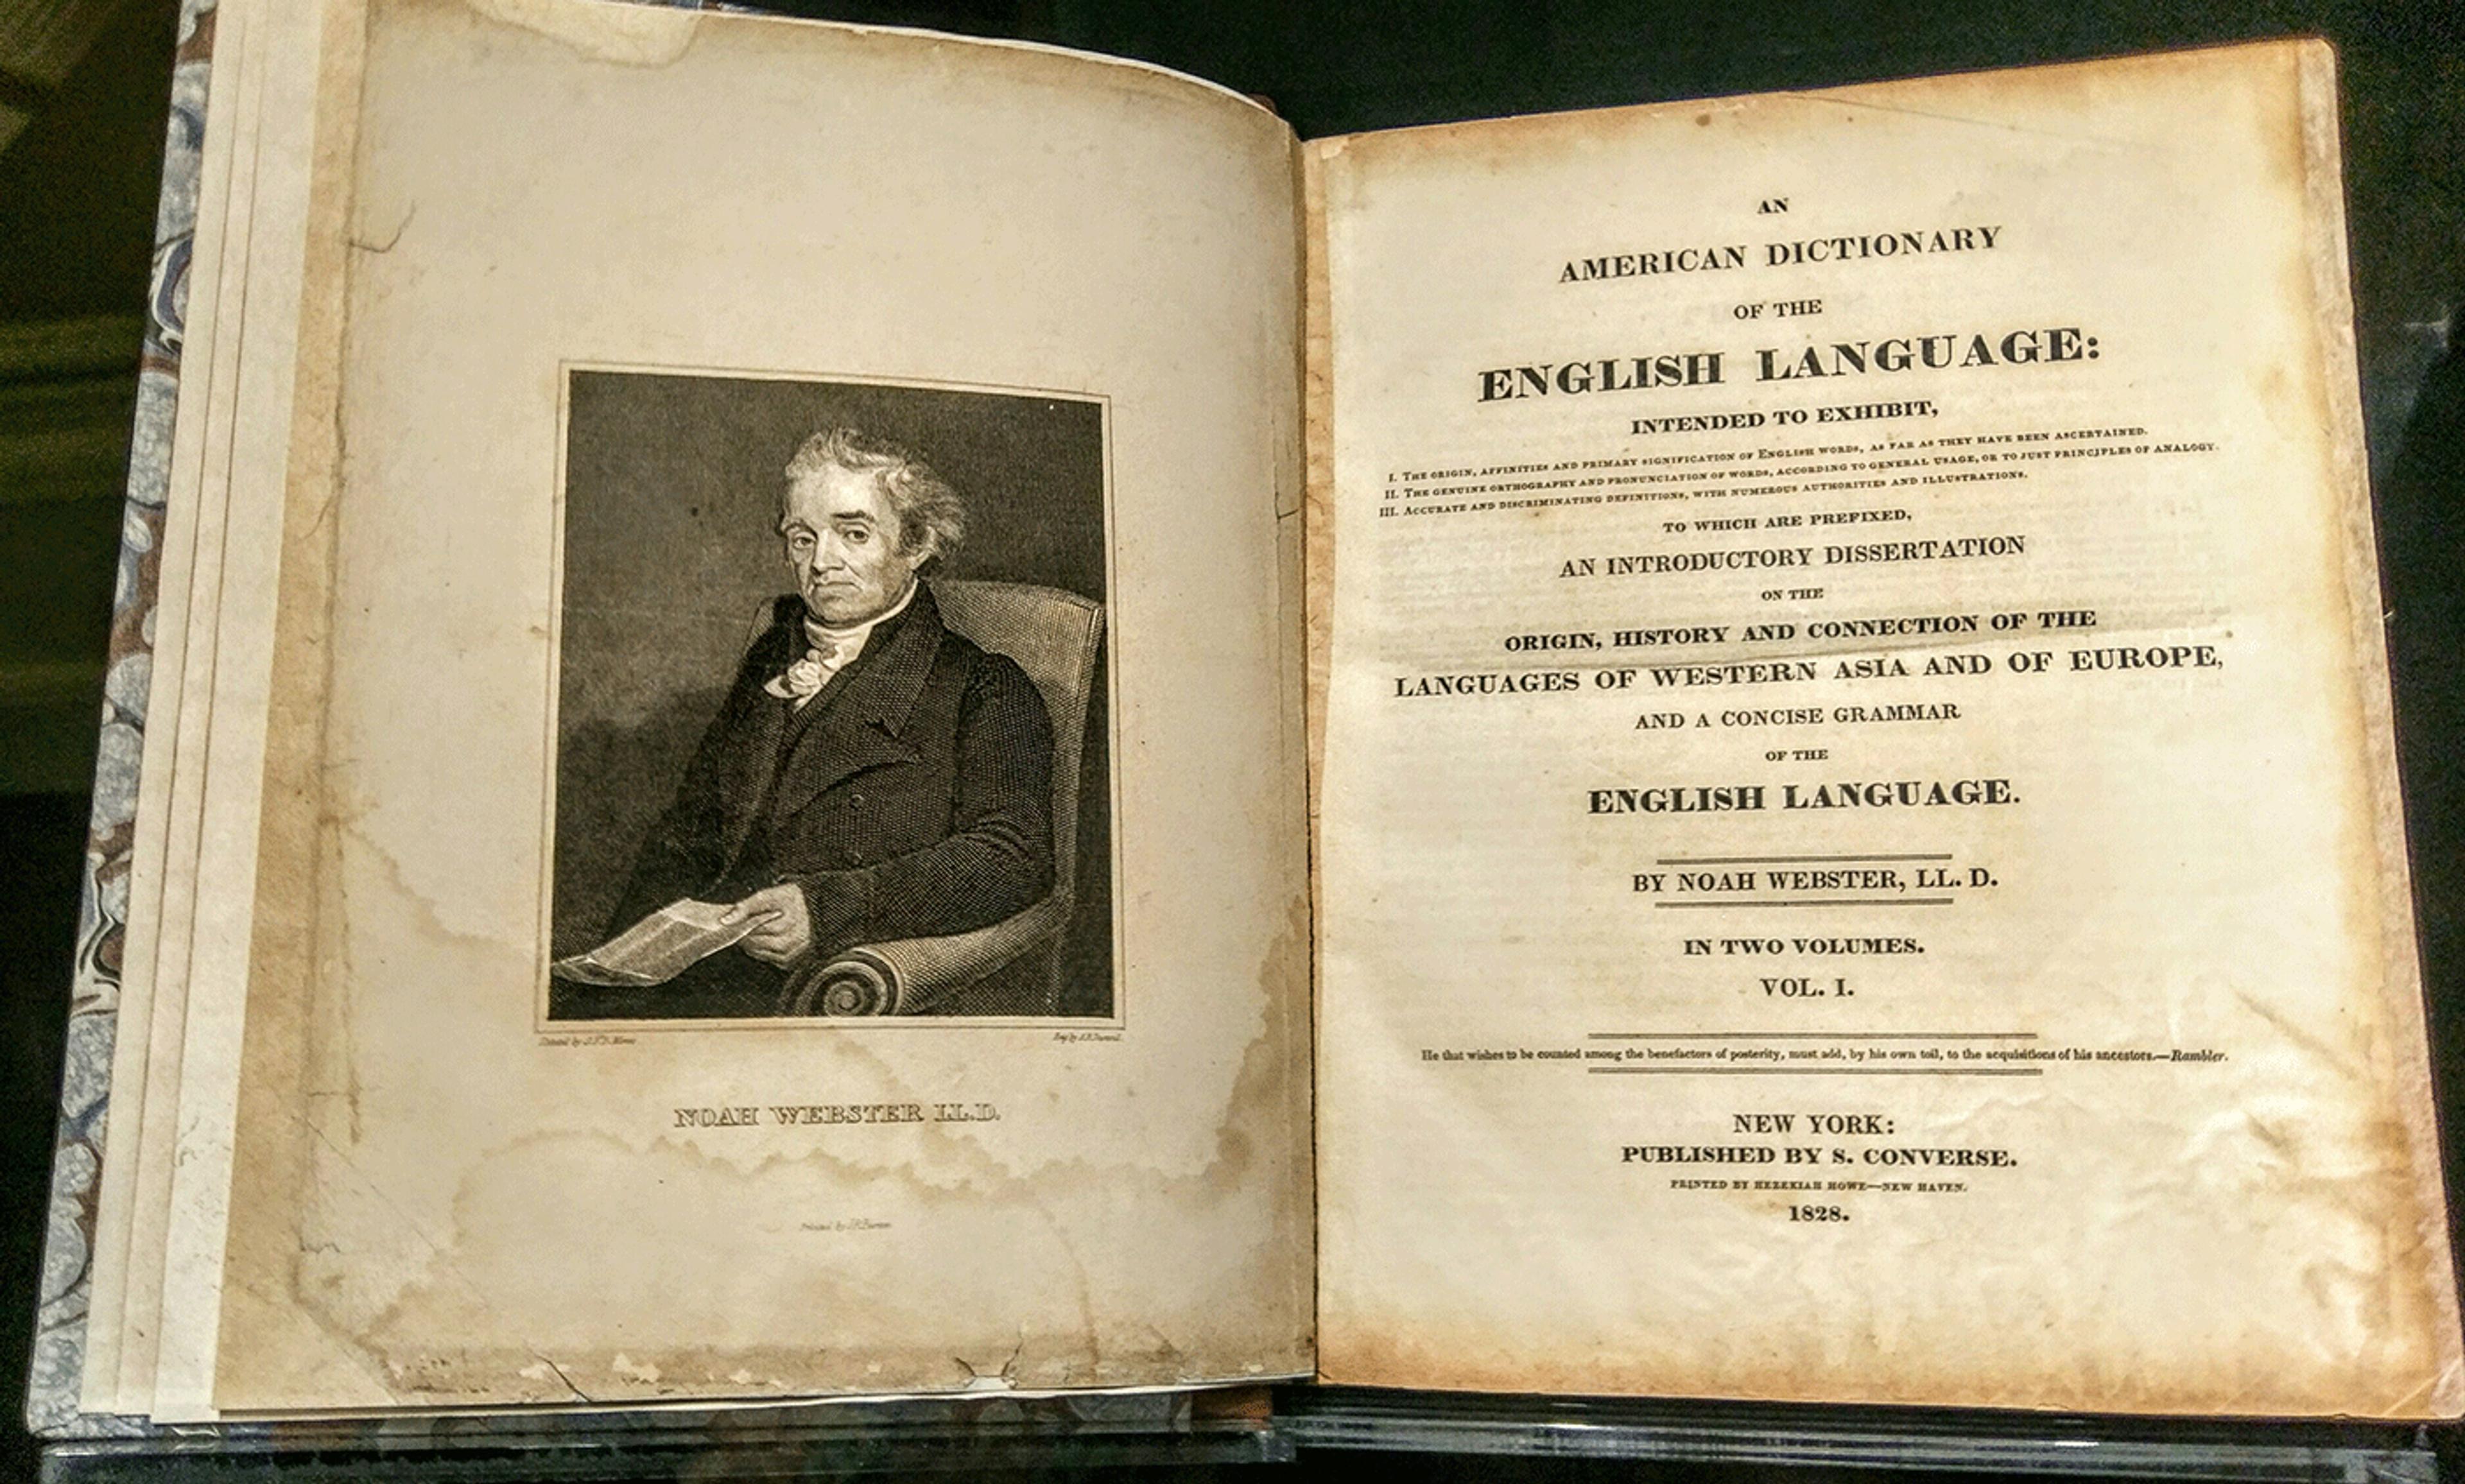 <p>The title page of Noah Webster’s 1828 edition of the <em>American Dictionary of the English Language</em>. <em>Courtesy Wikimedia</em></p>